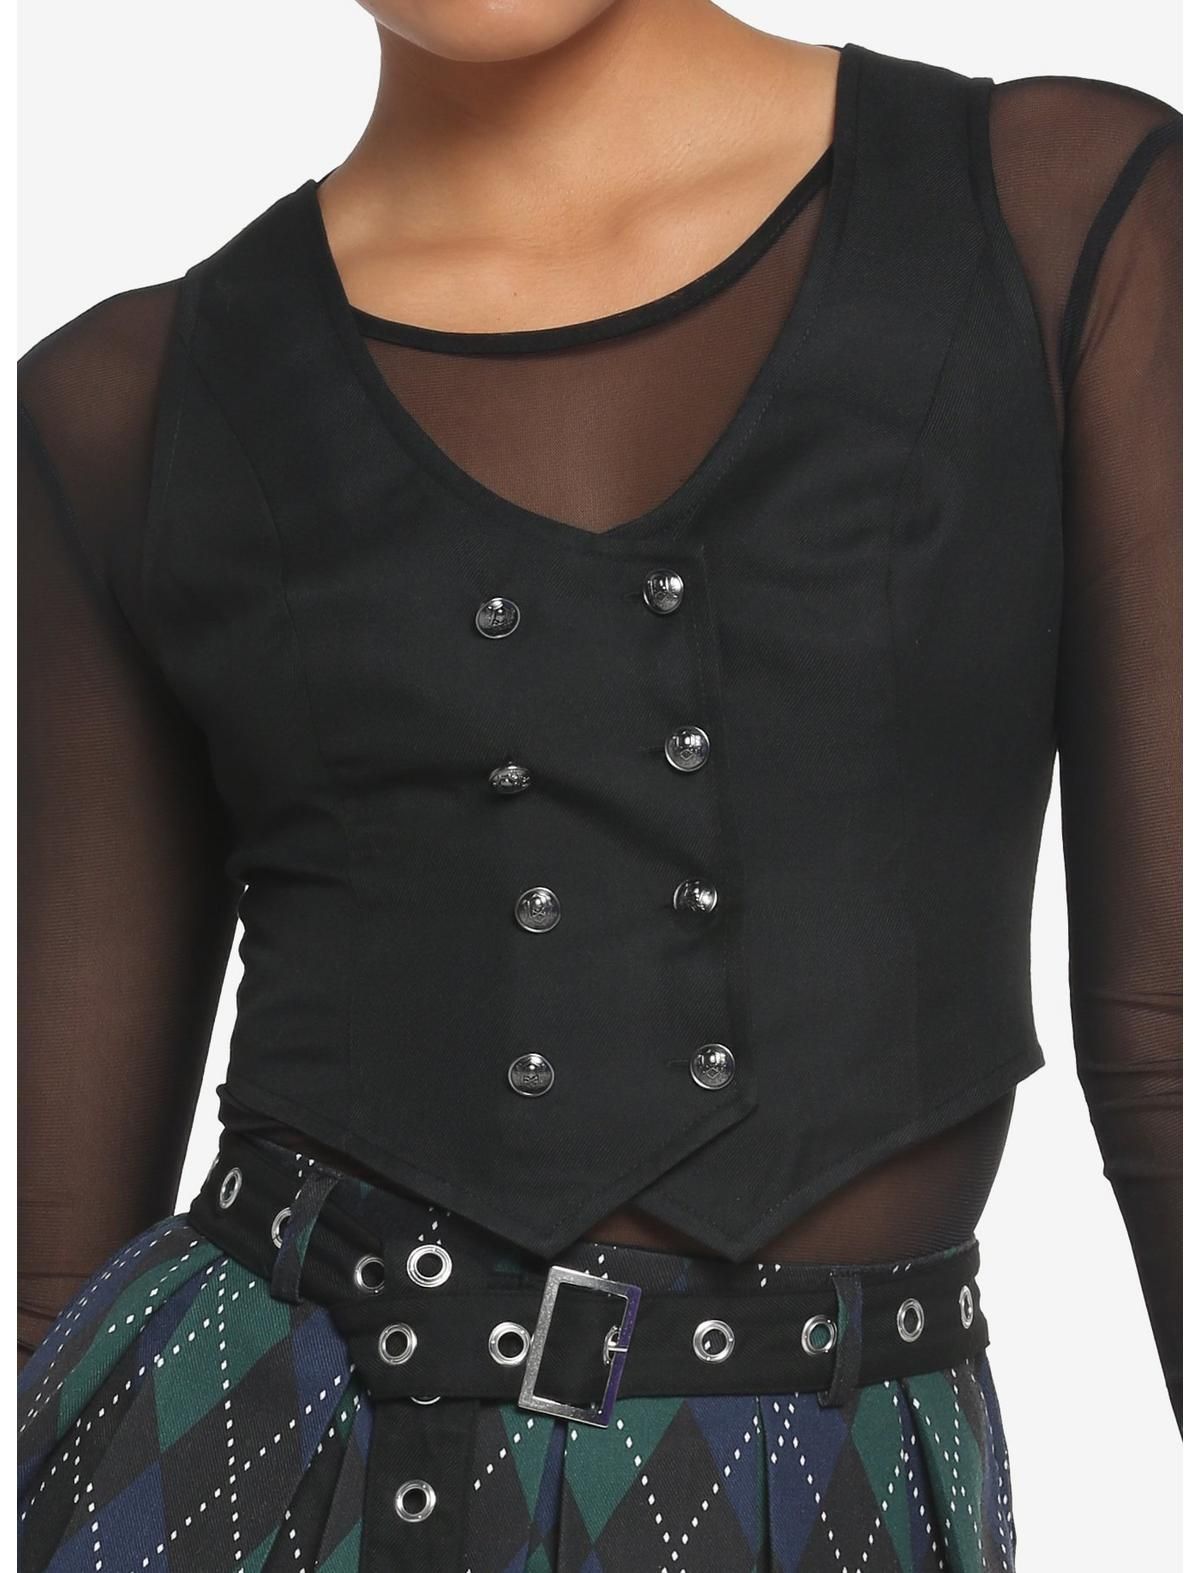 Black Double-Breasted Girls Vest | Hot Topic | Hot Topic